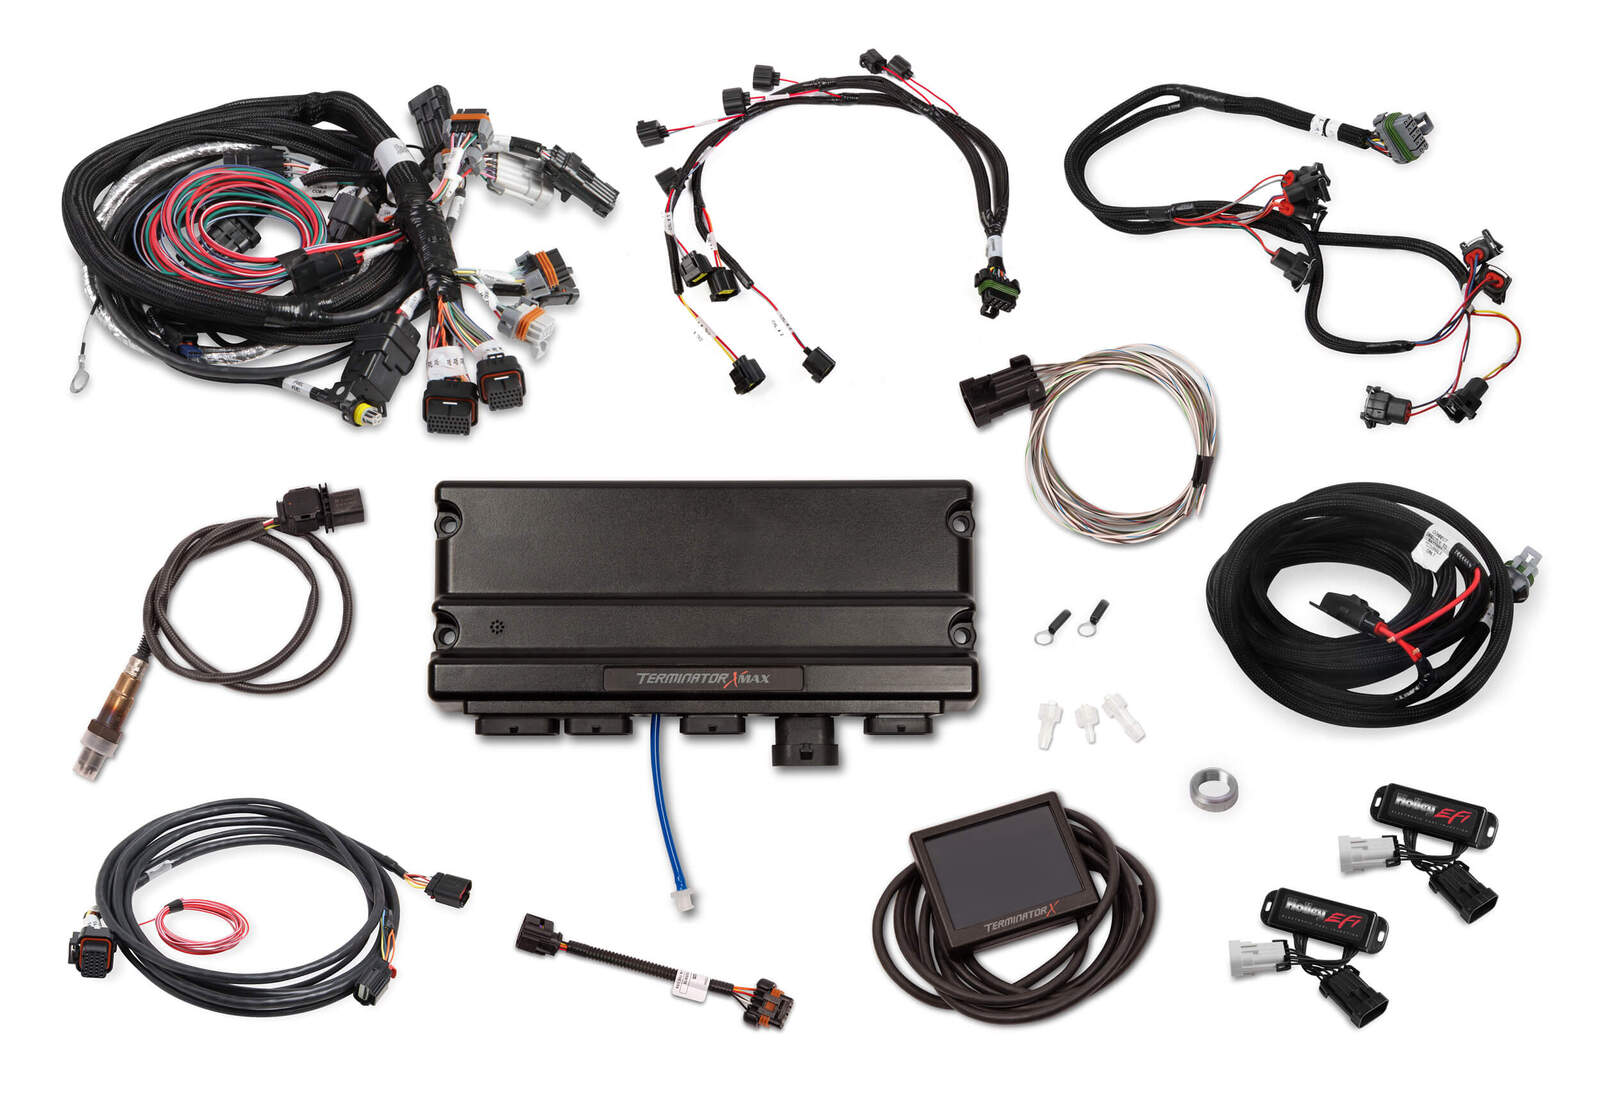 Holley EFI Engine Management System, 2013+ Hemi Gen III, Drive by Wire, Non-VVT Transmission Controller, EV1 Injectors, Kits